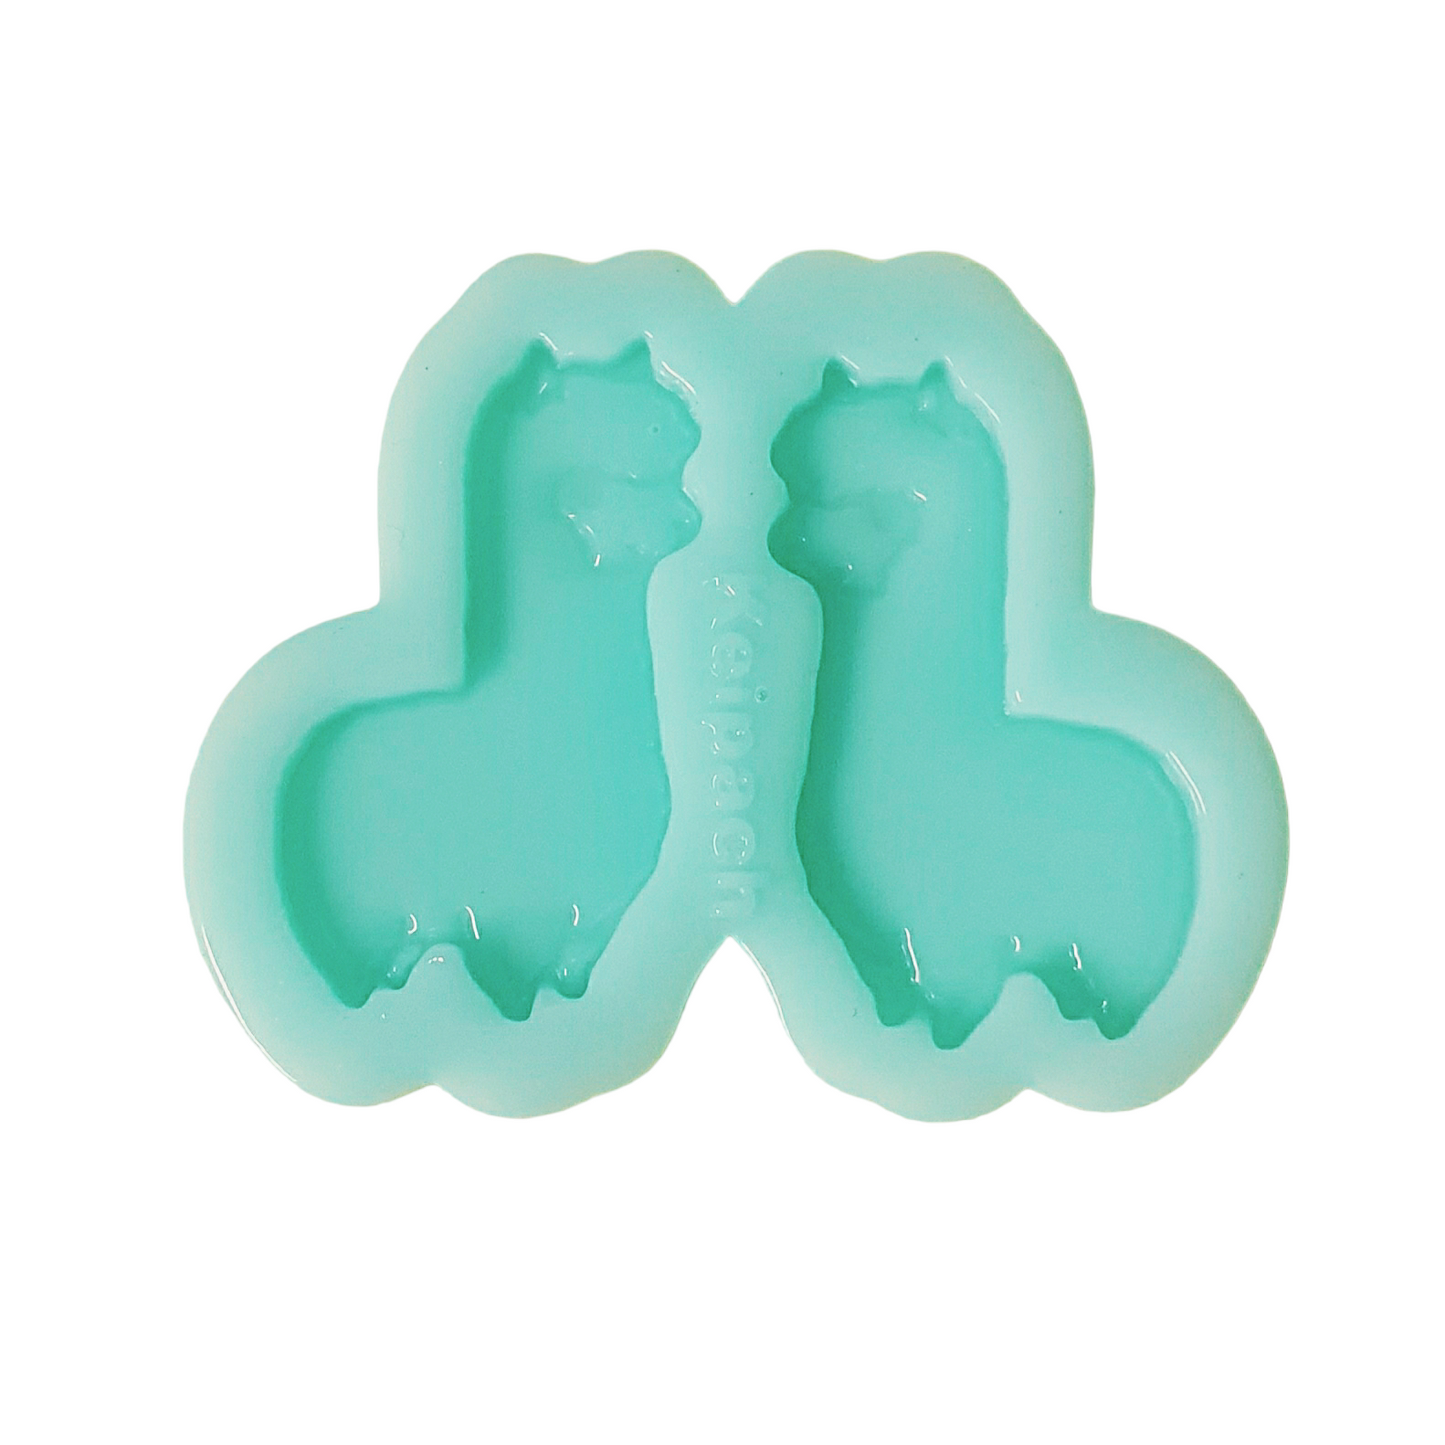 Llama Earring Set Silicone Resin Mould - Keipach